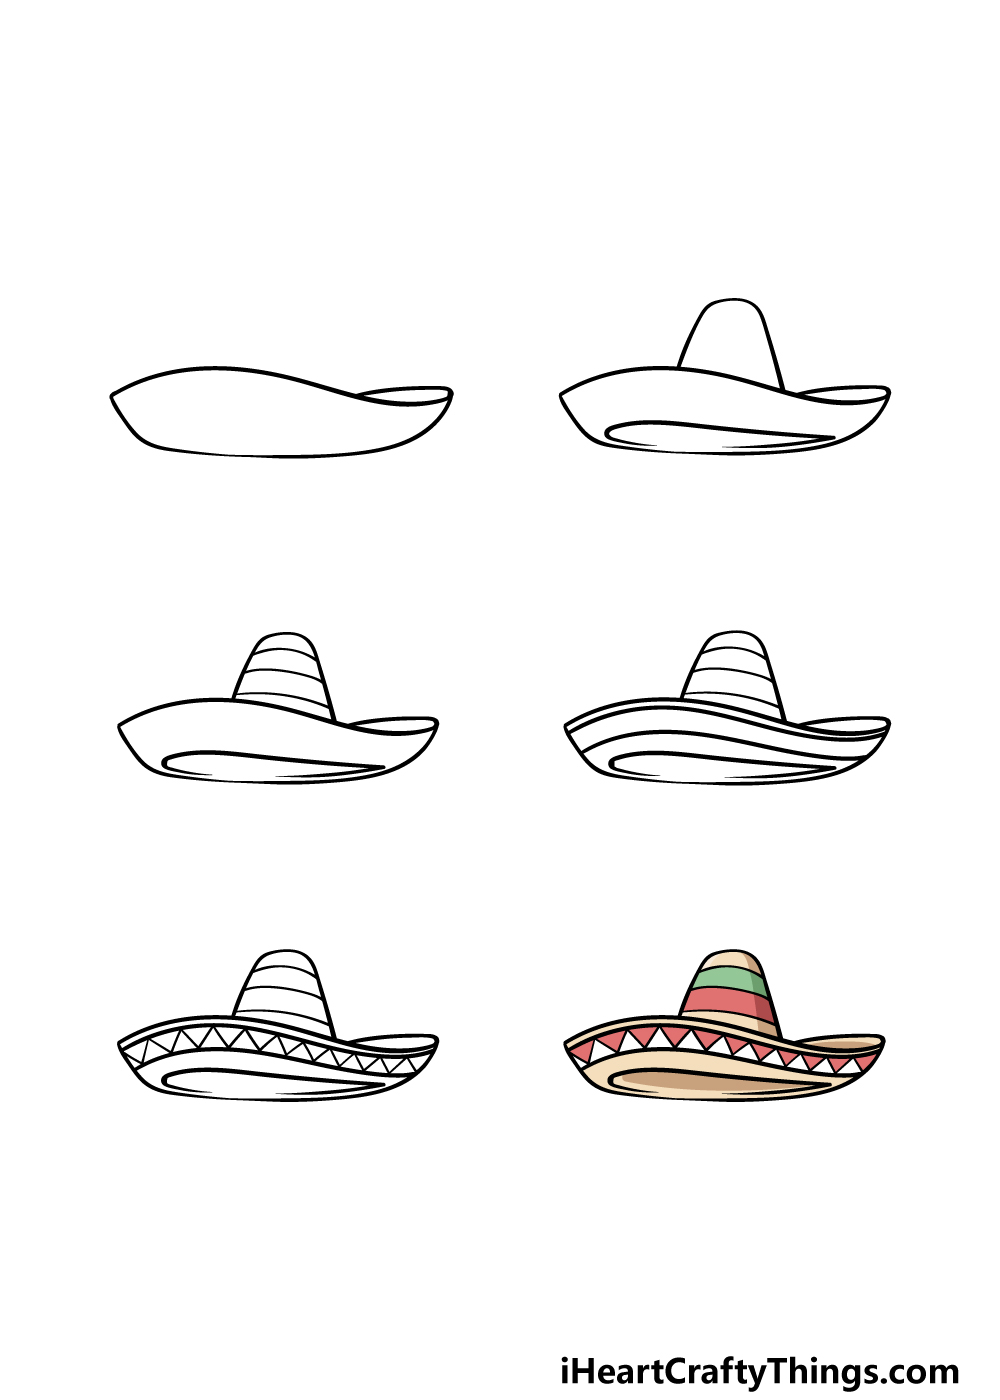 how to draw a Sombrero in 6 steps